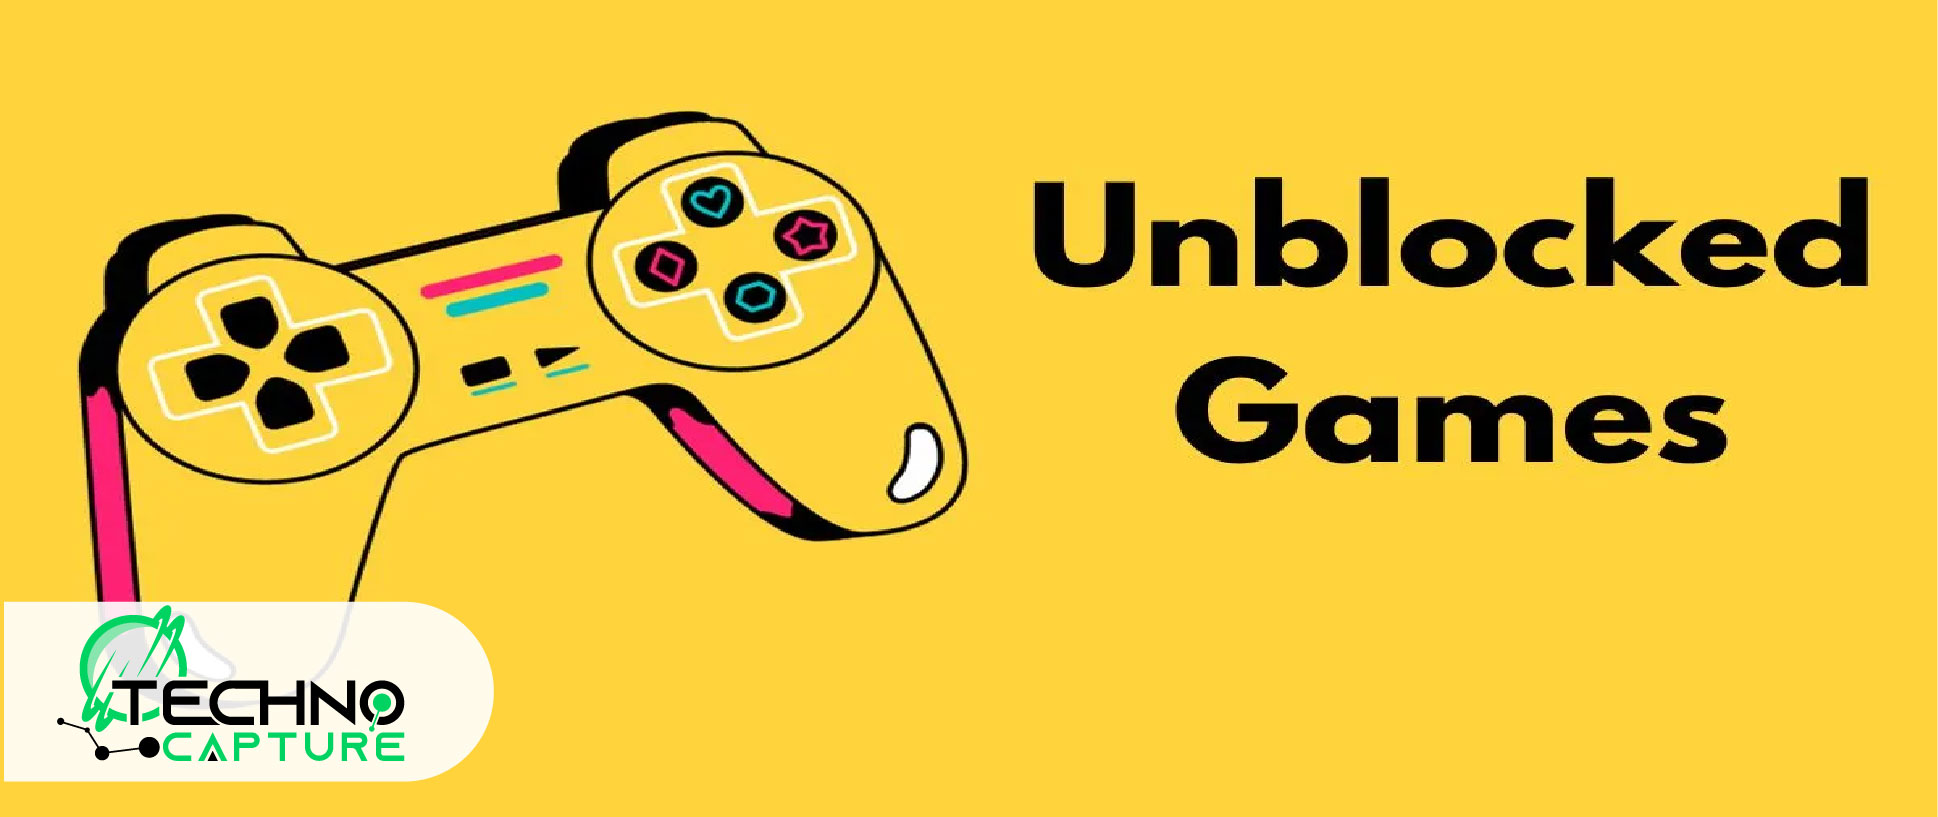 Unblocked Games 77: Best Free Games For Students